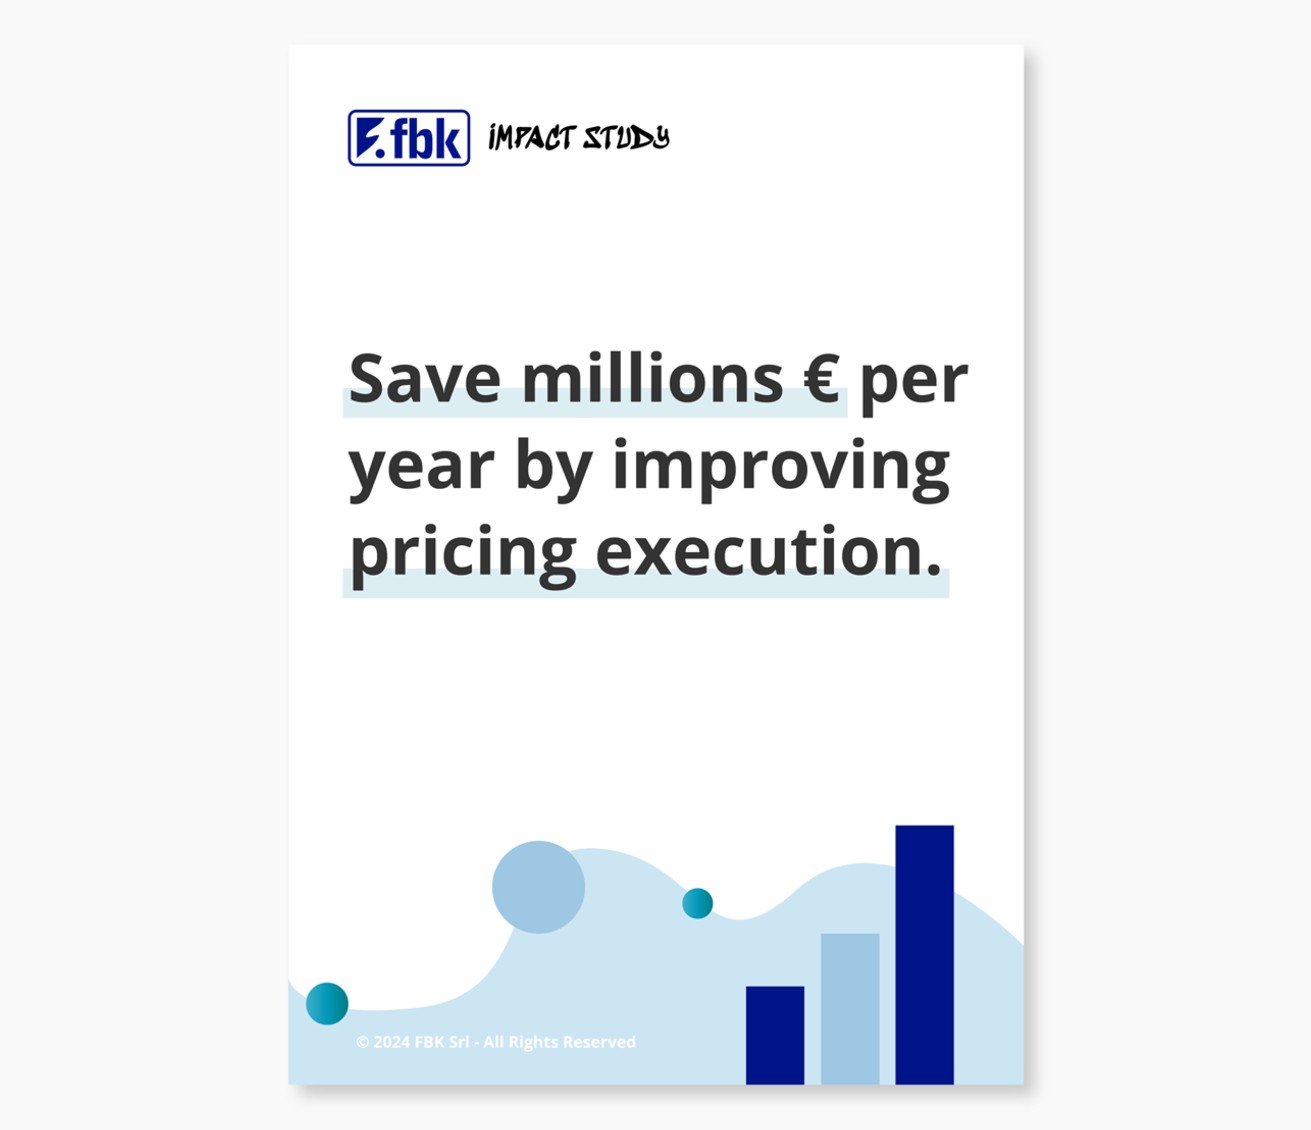 Save millions of € per year by improving pricing execution.